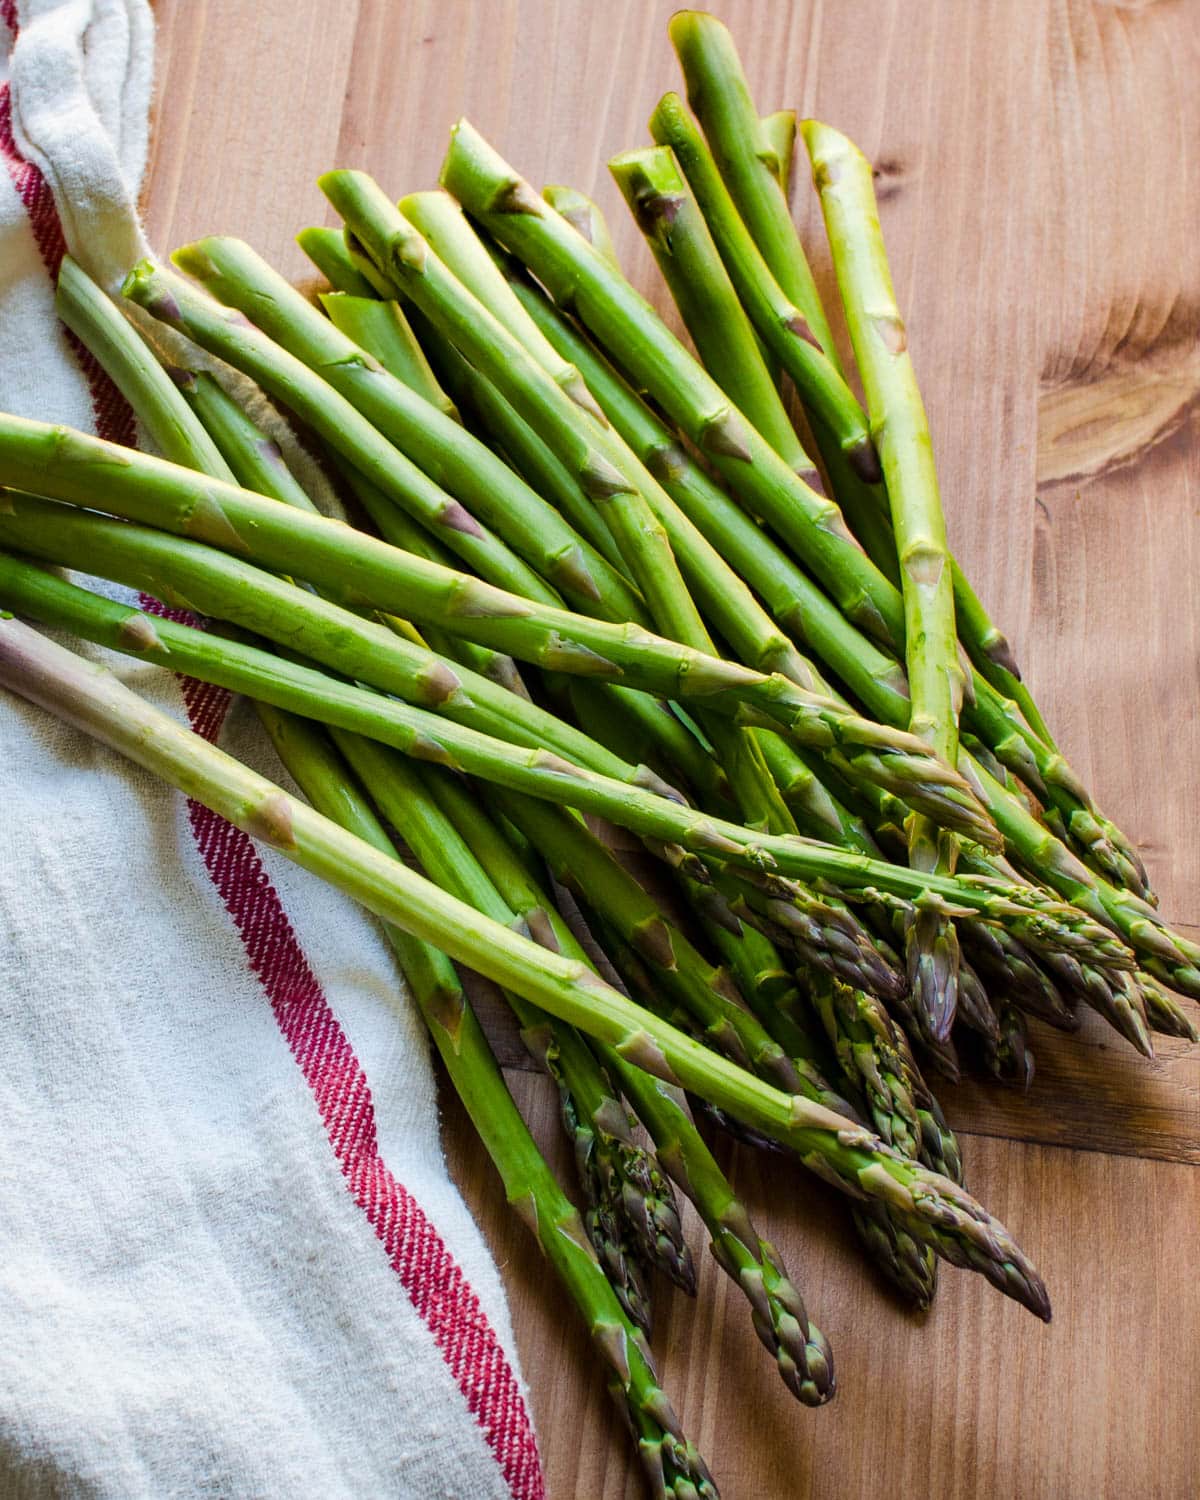 Trim the tough ends of the asparagus while leaving the tips intact.